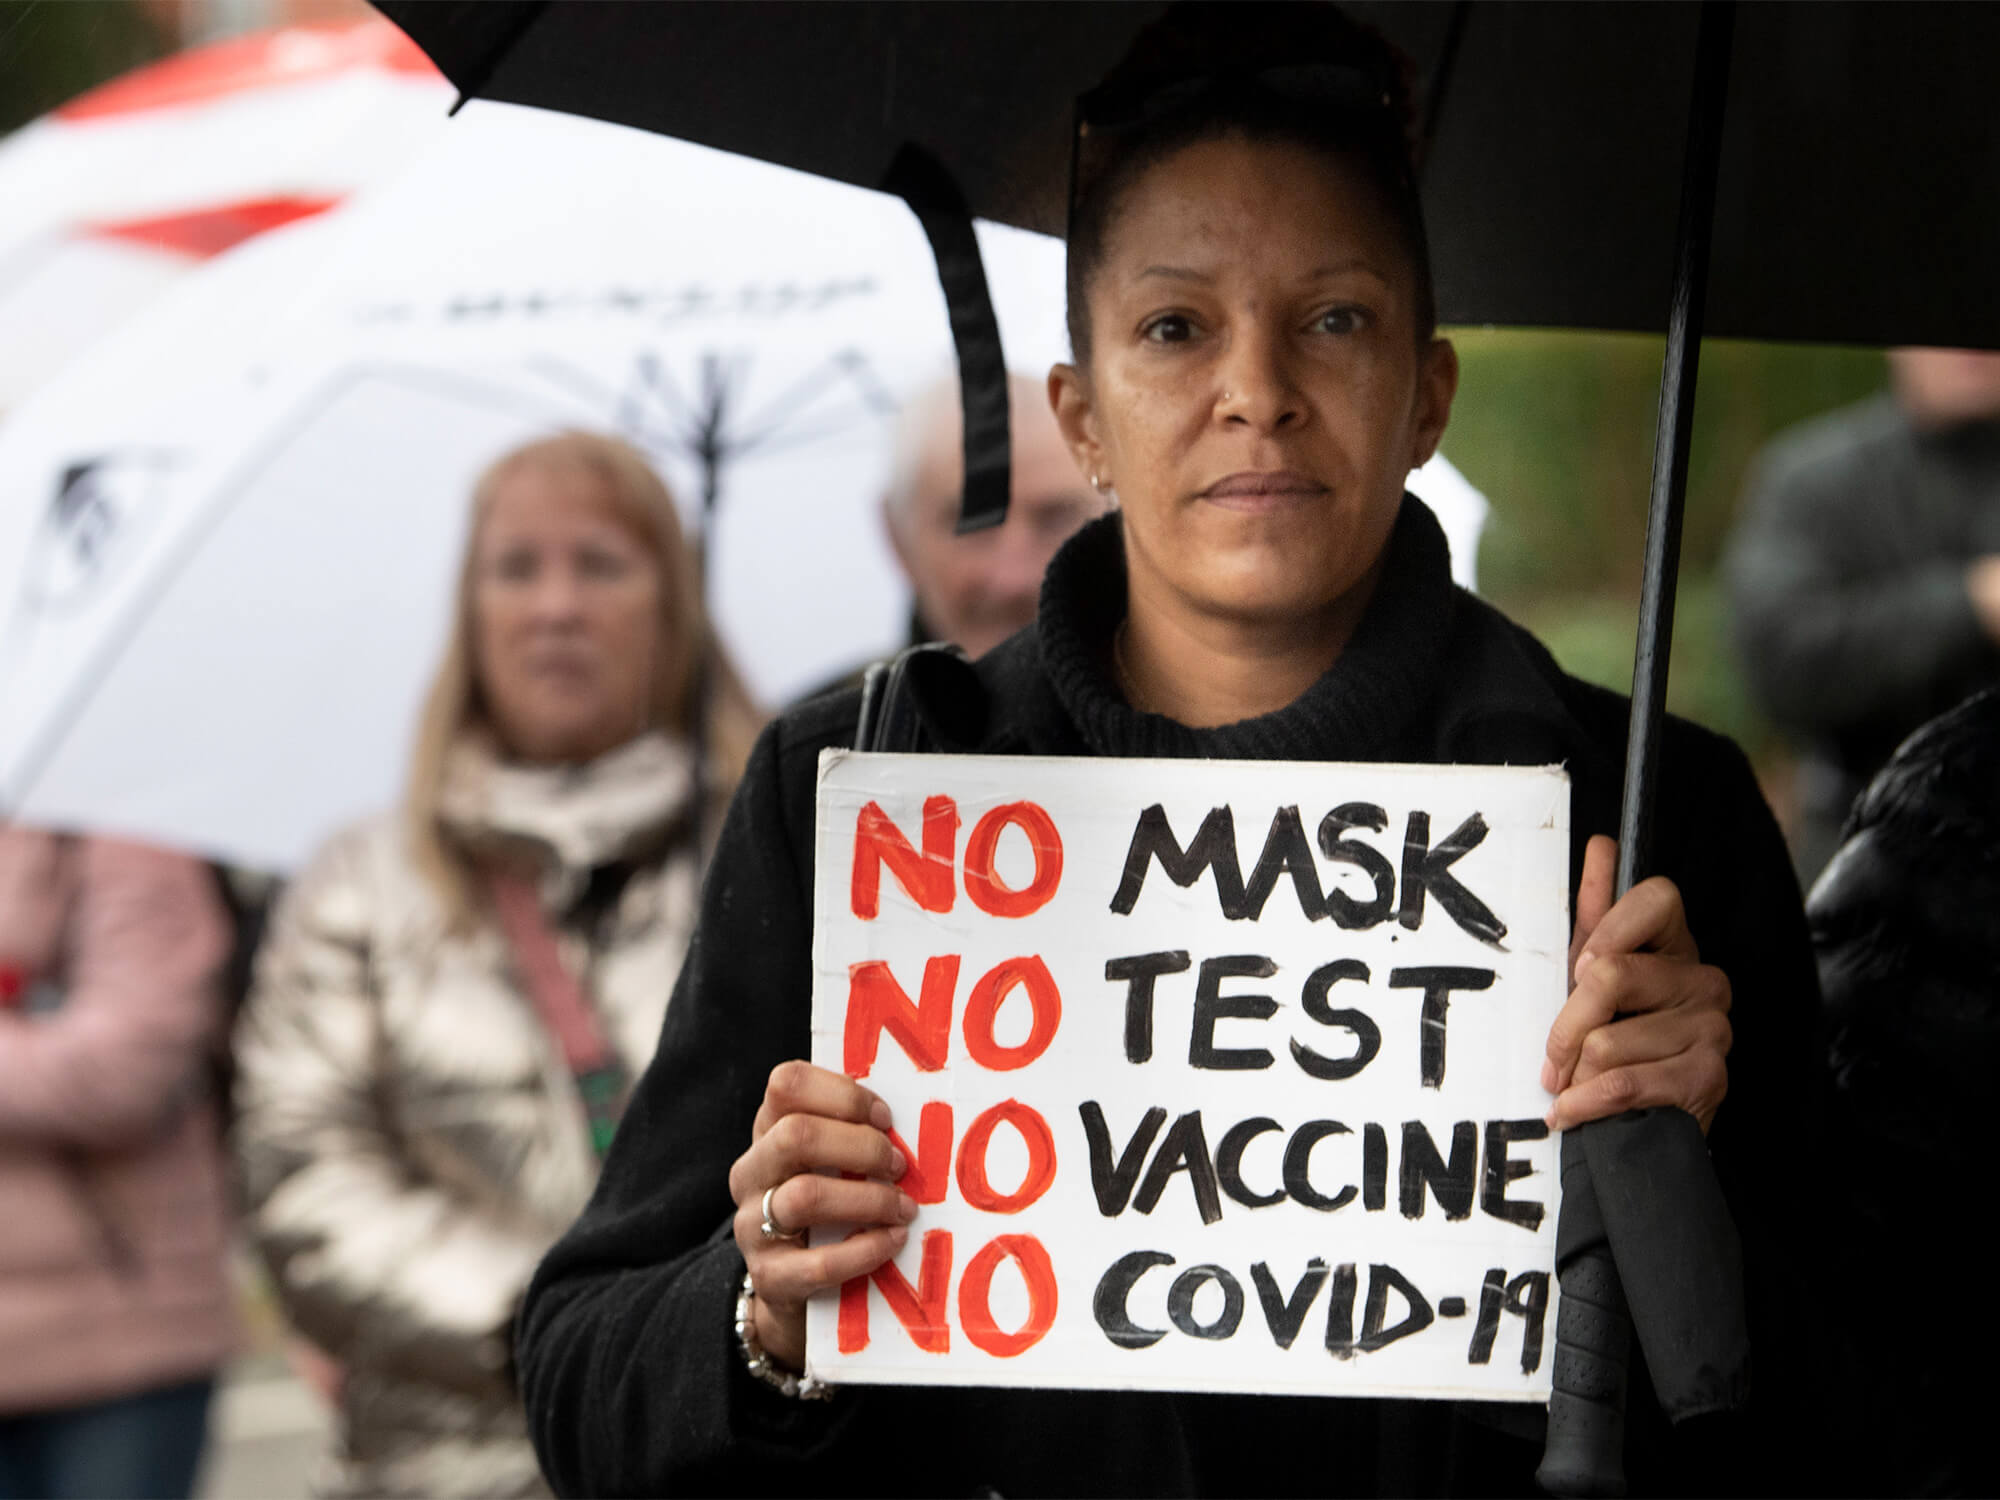 An anti-vaccine protester